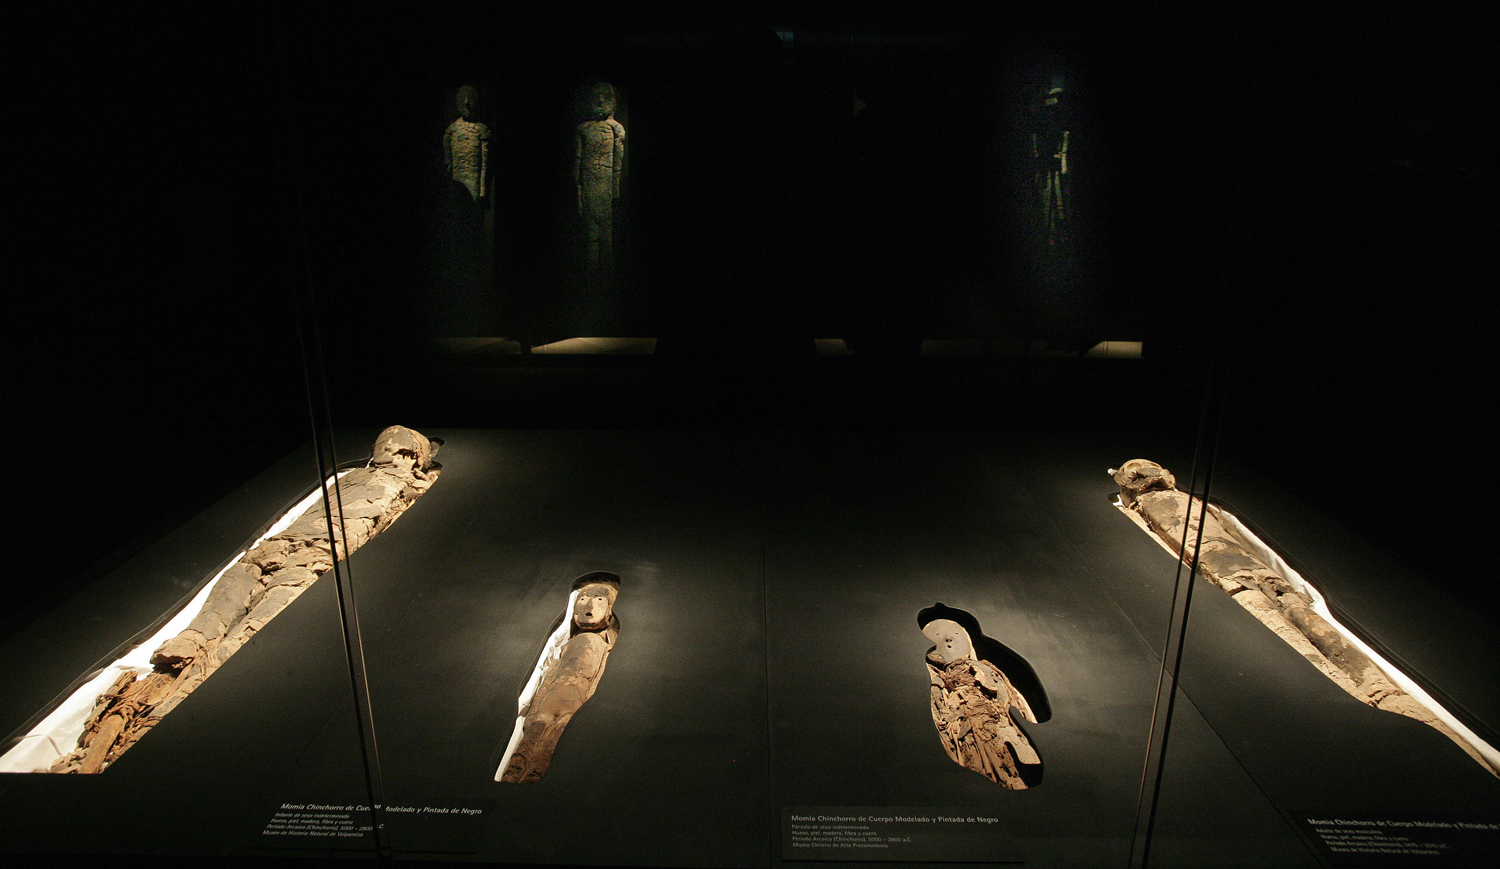 A group of Chinchorro mummies — dated between 5000 B.C. and 3000 B.C. — are on display during the exhibition "Arica, a Thousand-Year-Old Culture," on Aug. 27, 2008, in the cultural center of the La Moneda presidential palace in Santiago, Chile (Claudio Santana —AFP/Getty Images)